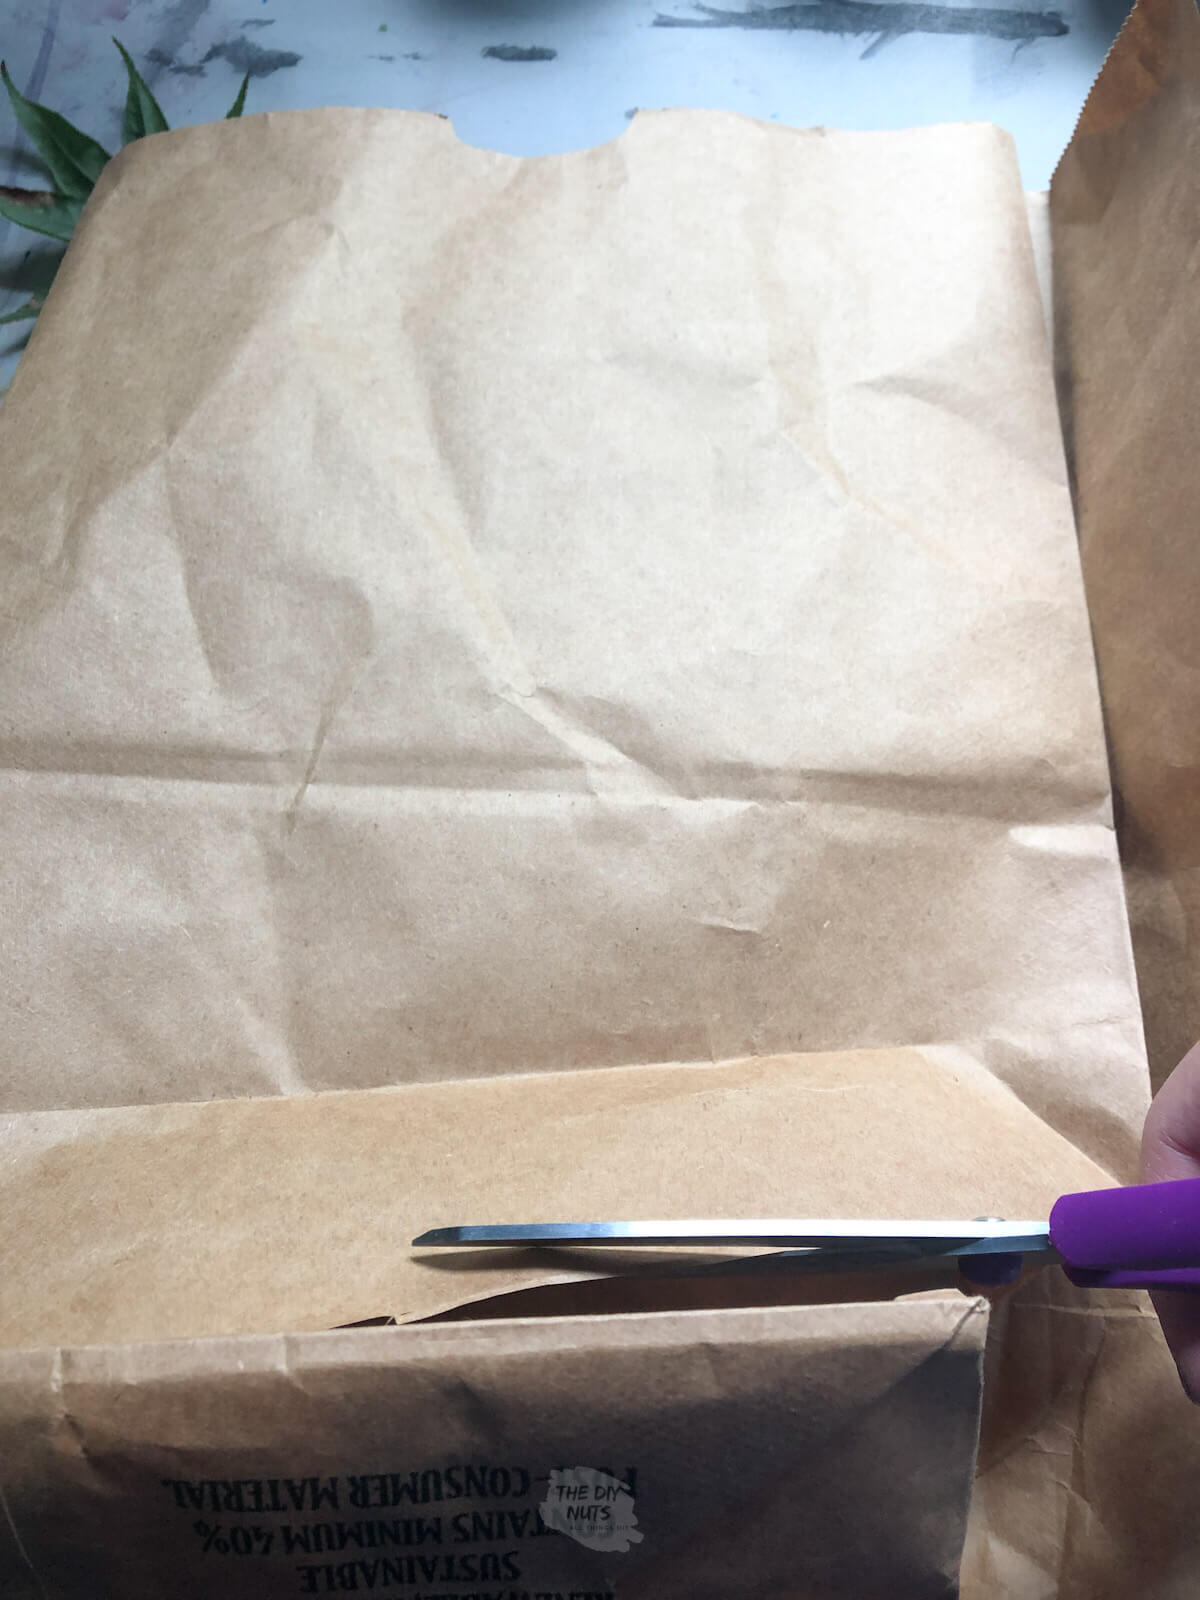 How to cut a brown bag for wrapping paper